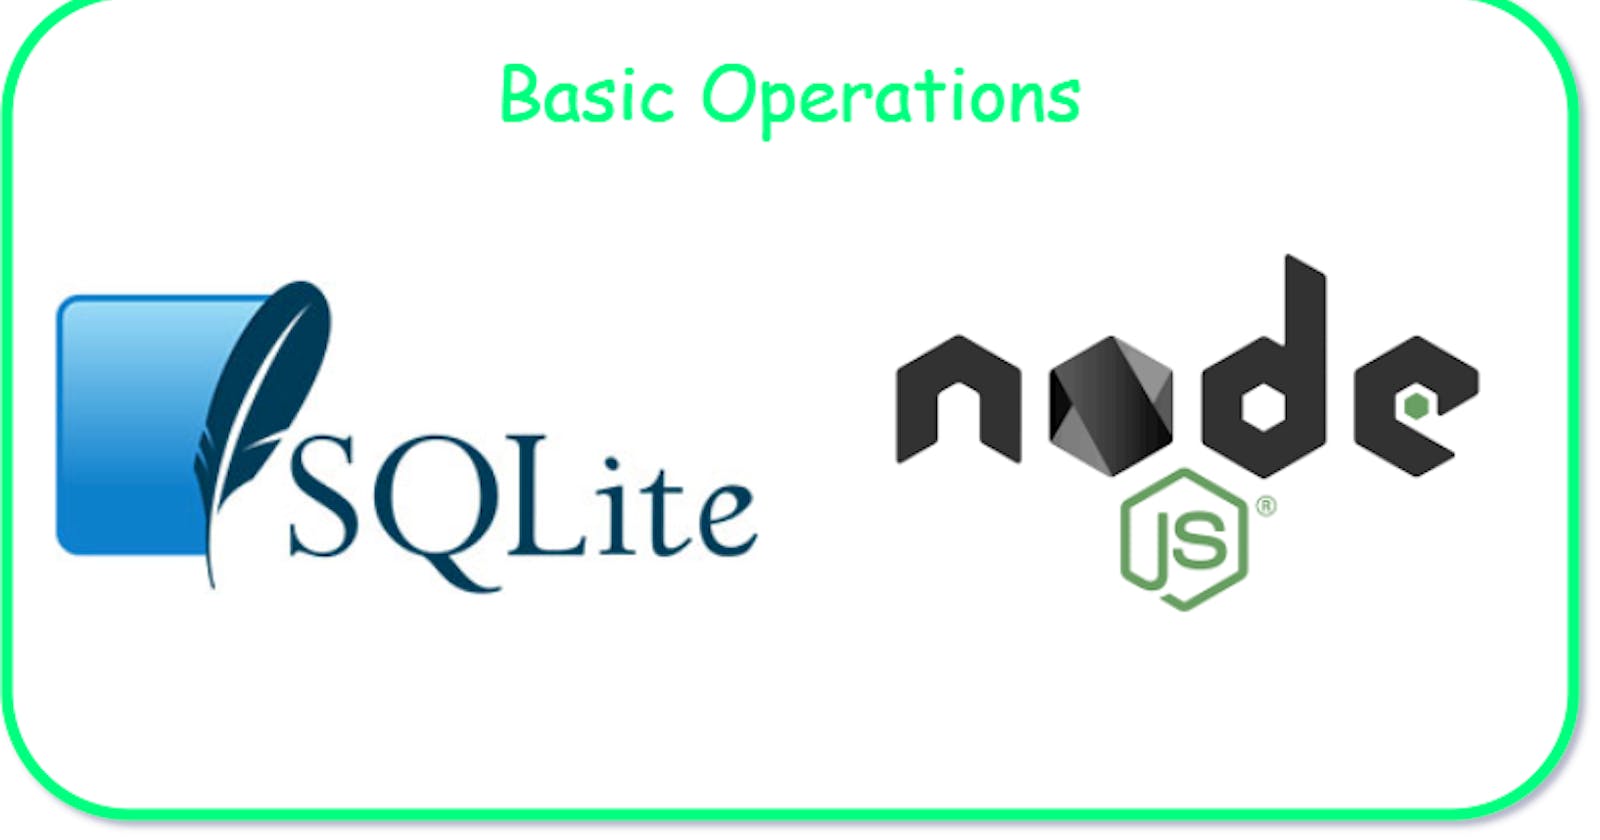 Learn Basic Operations with SQLite and Nodejs